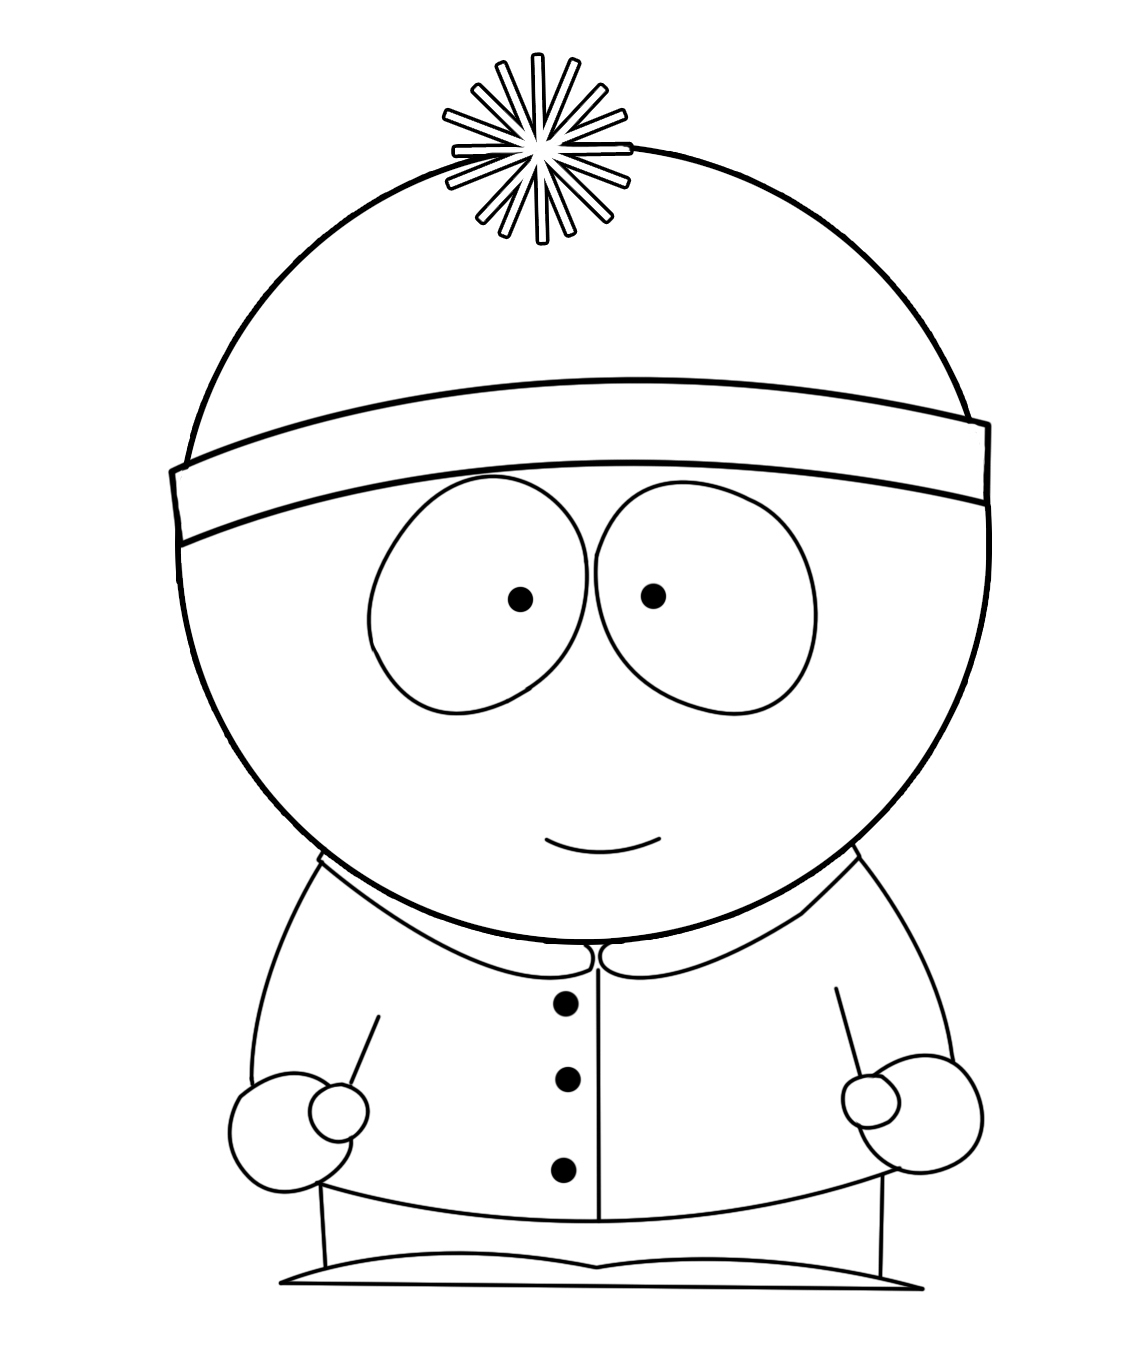 Free Printable Cartoons – With Comic Pictures Also Toddler Coloring - Free Printable South Park Coloring Pages